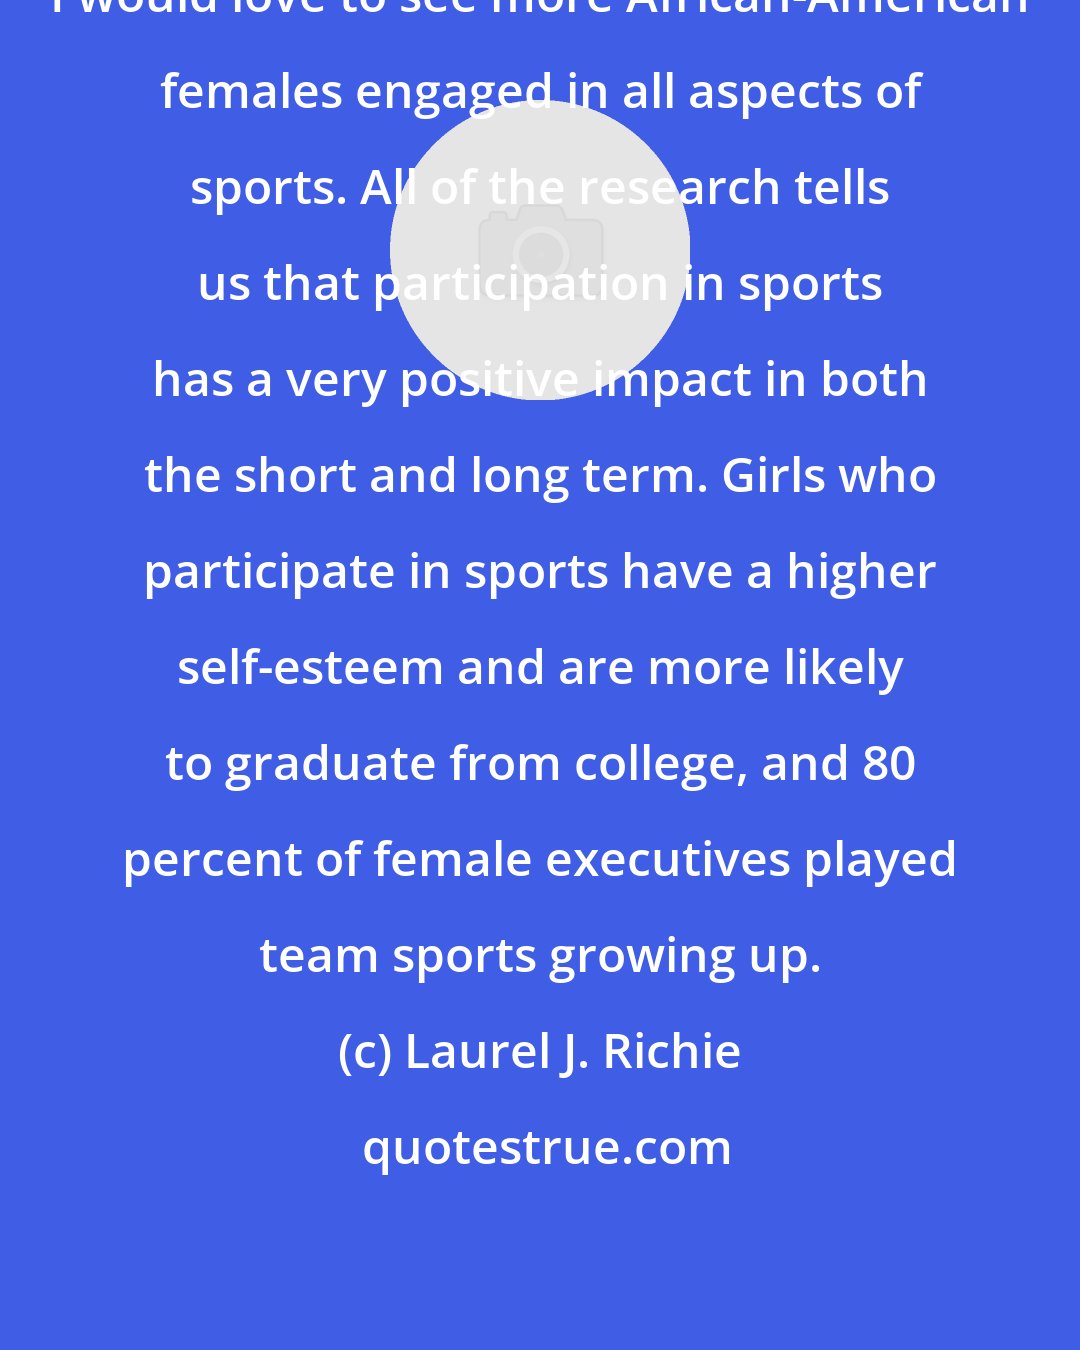 Laurel J. Richie: I would love to see more African-American females engaged in all aspects of sports. All of the research tells us that participation in sports has a very positive impact in both the short and long term. Girls who participate in sports have a higher self-esteem and are more likely to graduate from college, and 80 percent of female executives played team sports growing up.